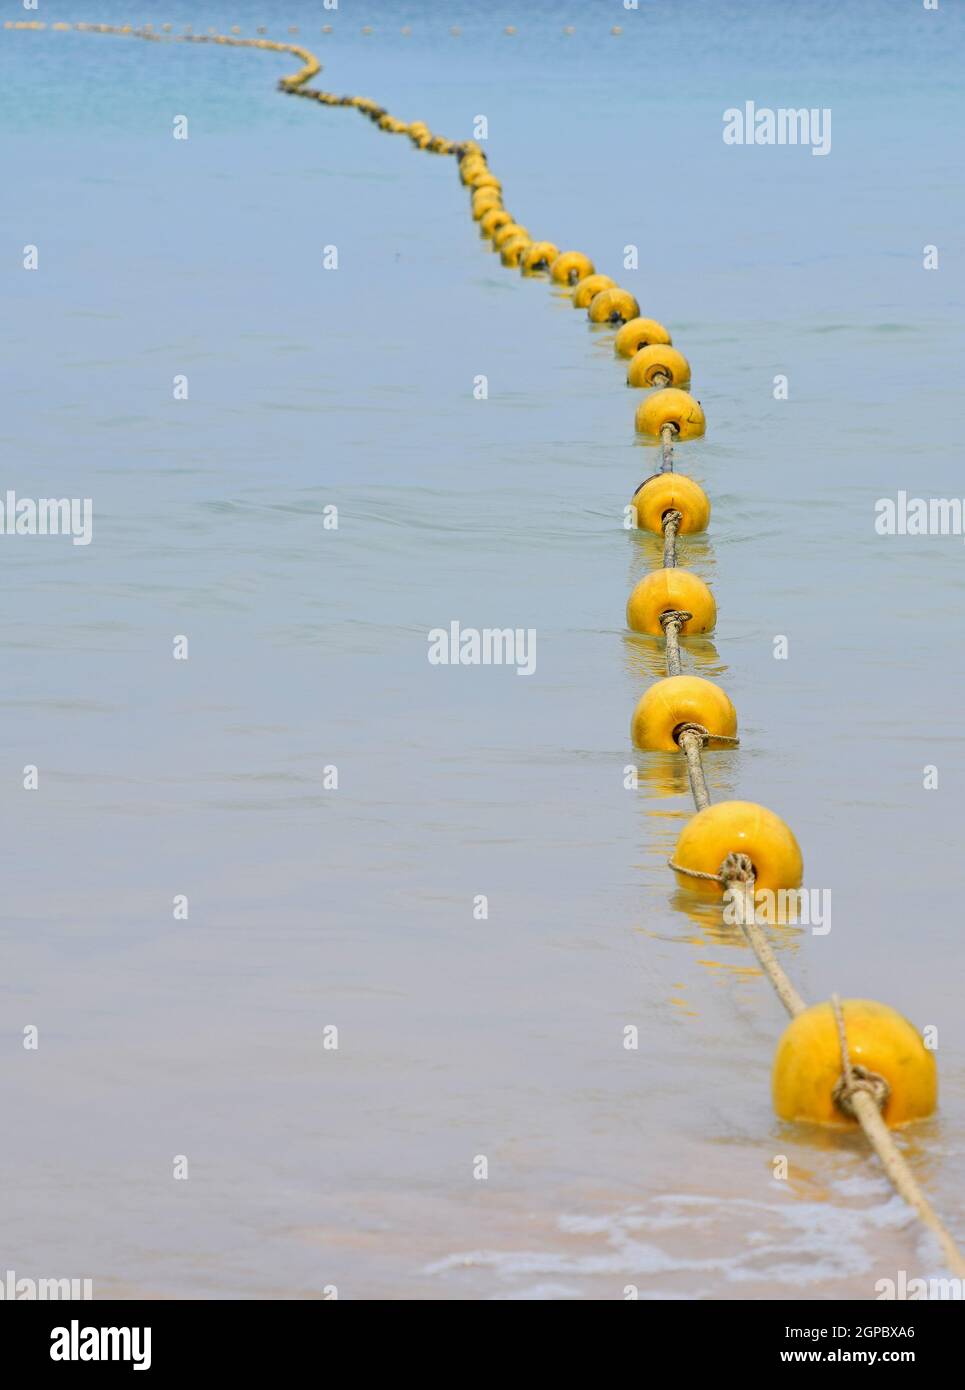 Chain of yellow polystyrene sea marker buoys with cable tow in blue sea water, in perspective Stock Photo